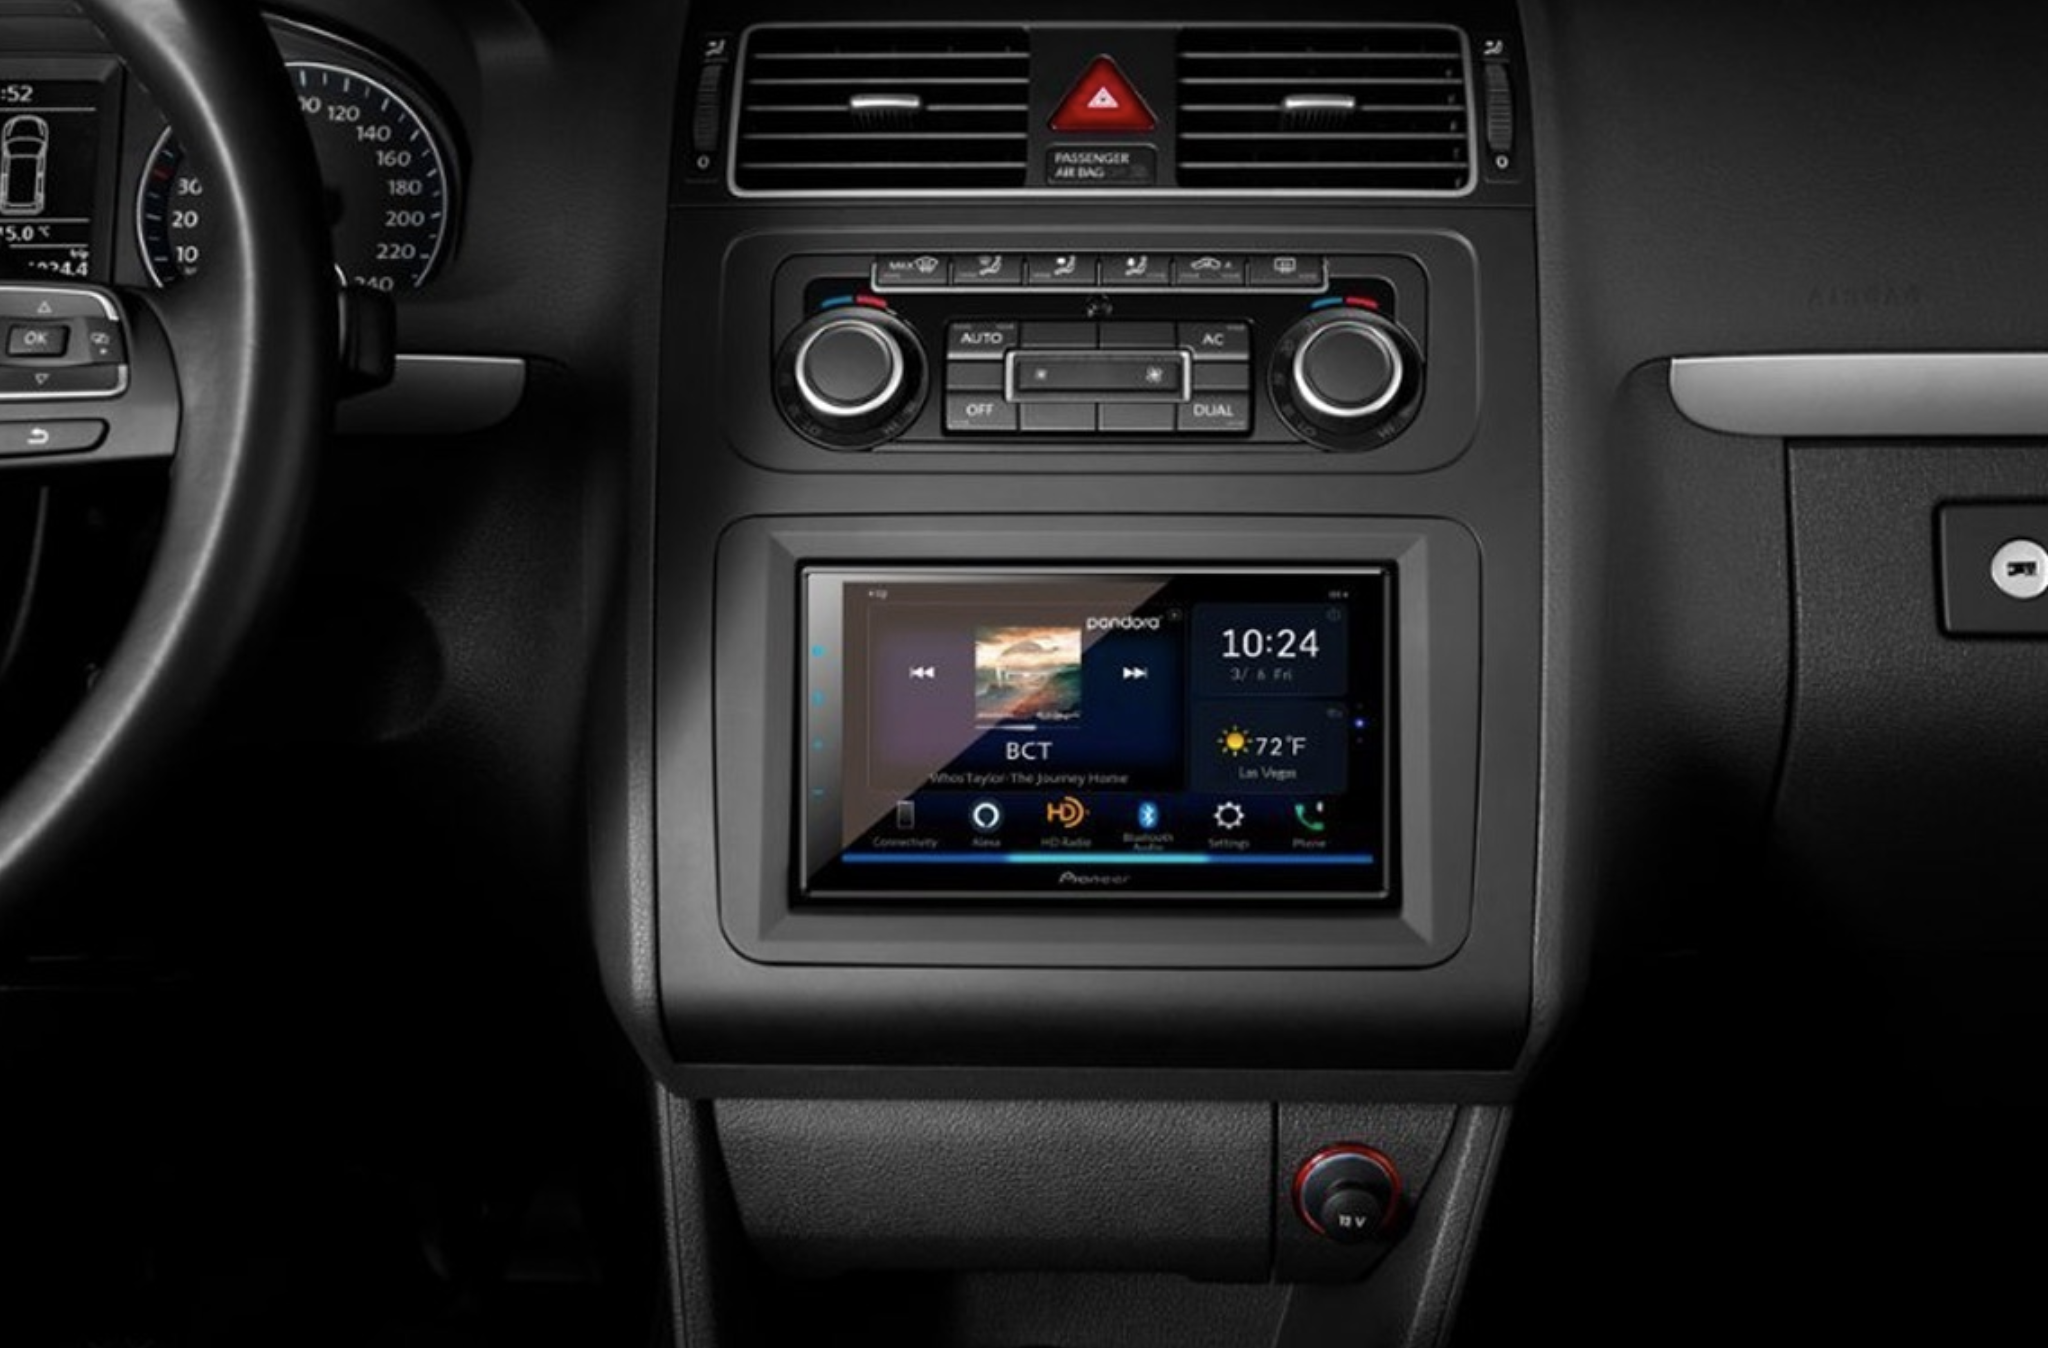 The 6.8-inch Pioneer digital media receiver installed in a vehicle's dashboard.